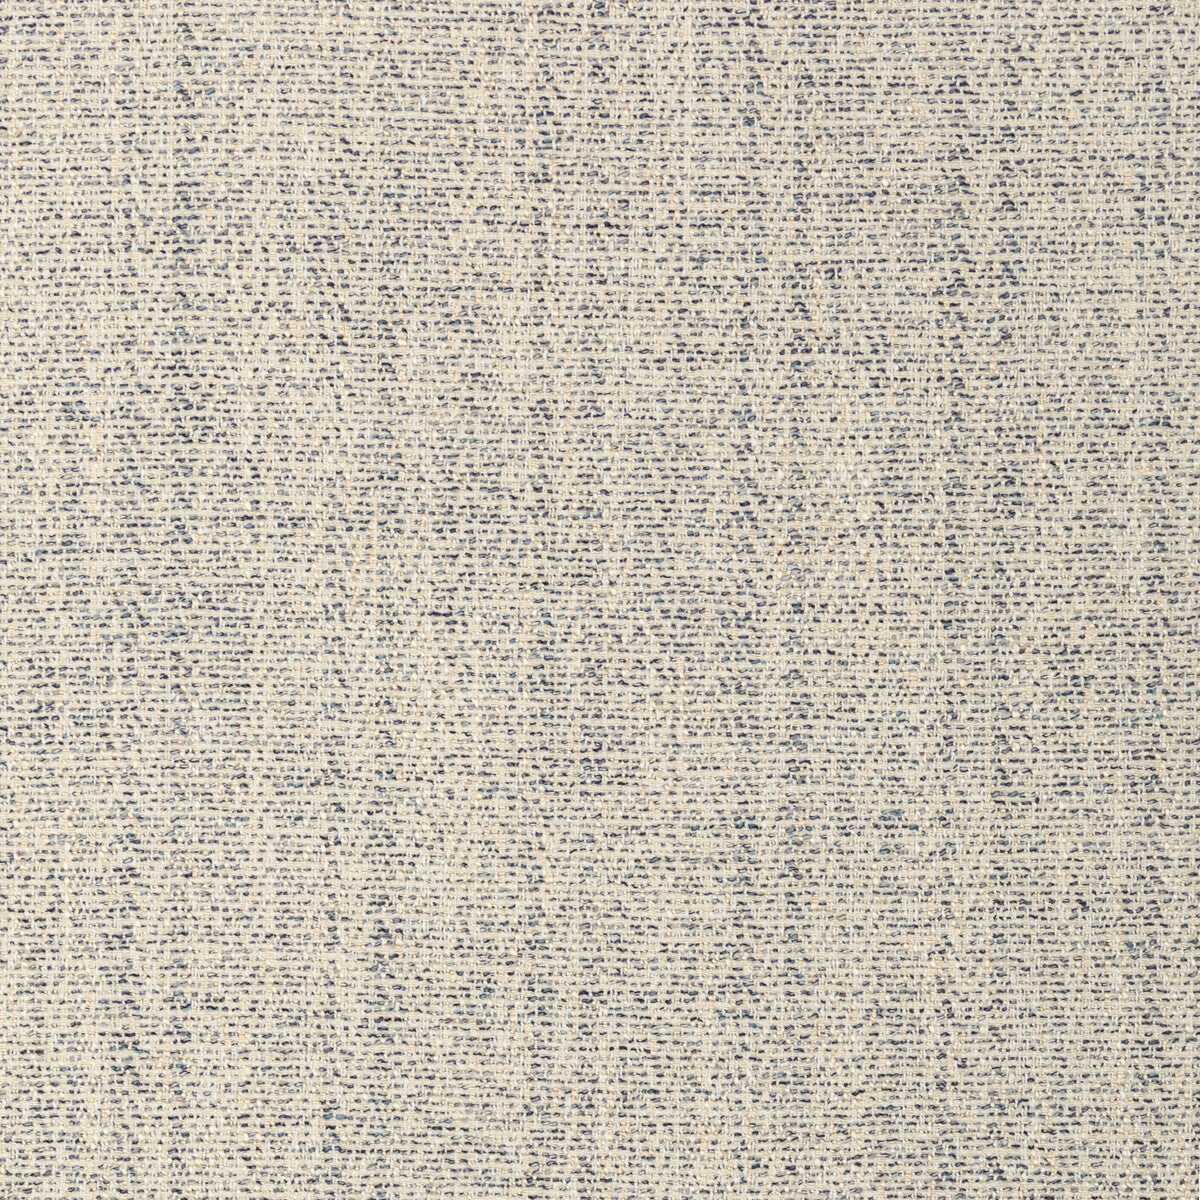 Alfaro Weave fabric in denim color - pattern 2021107.5.0 - by Lee Jofa in the Triana Weaves collection